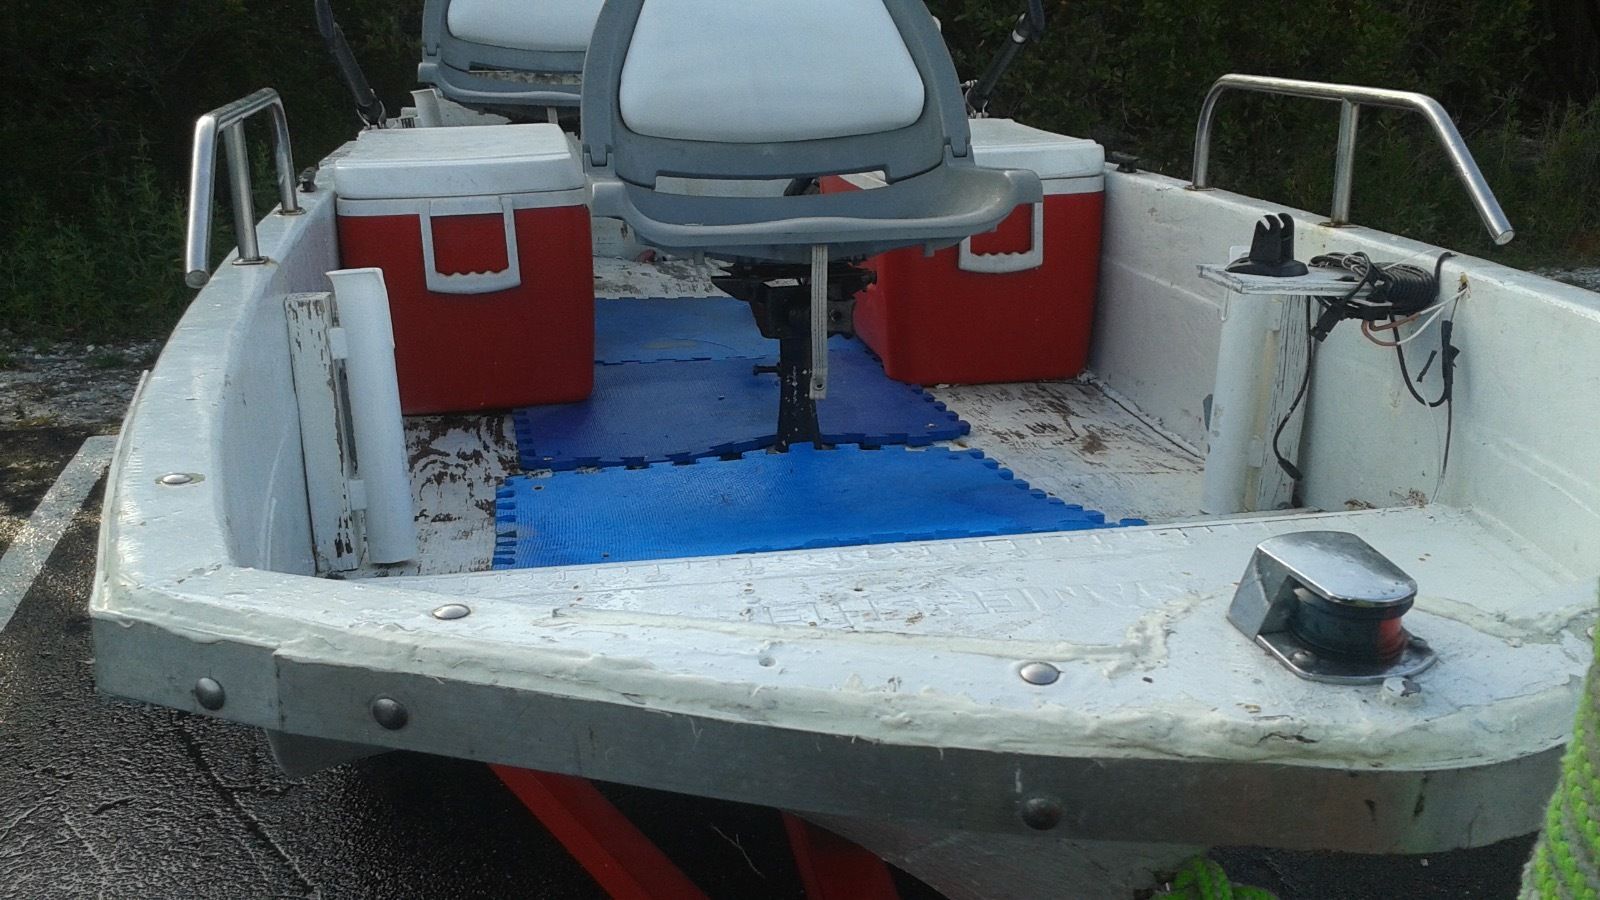 Homemade Fishing Boat 2013 for sale for $750 - Boats-from 